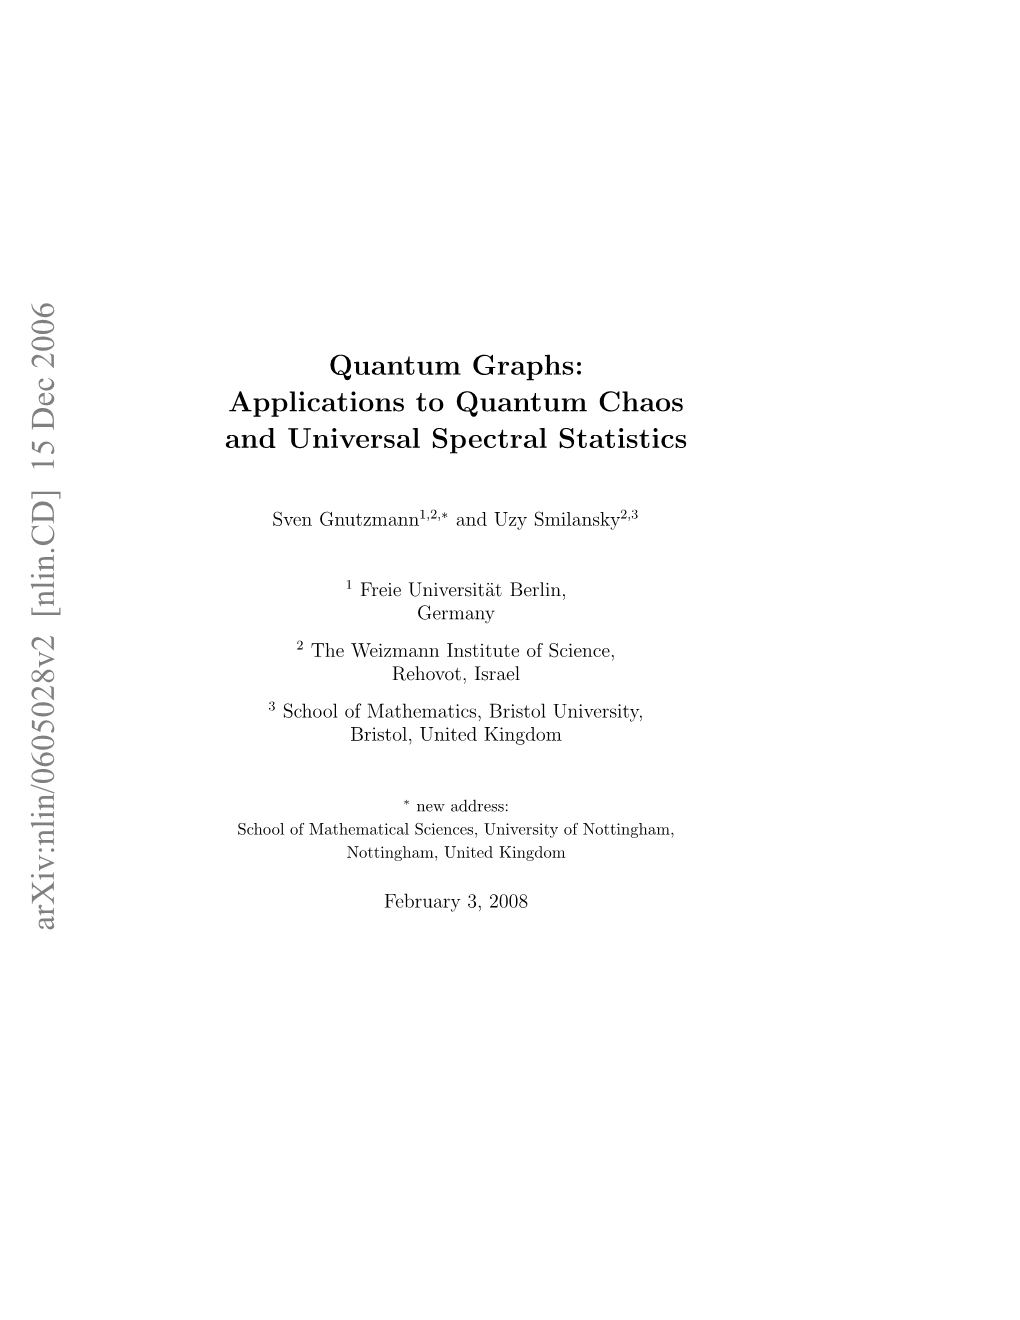 Quantum Graphs: Applications to Quantum Chaos and Universal